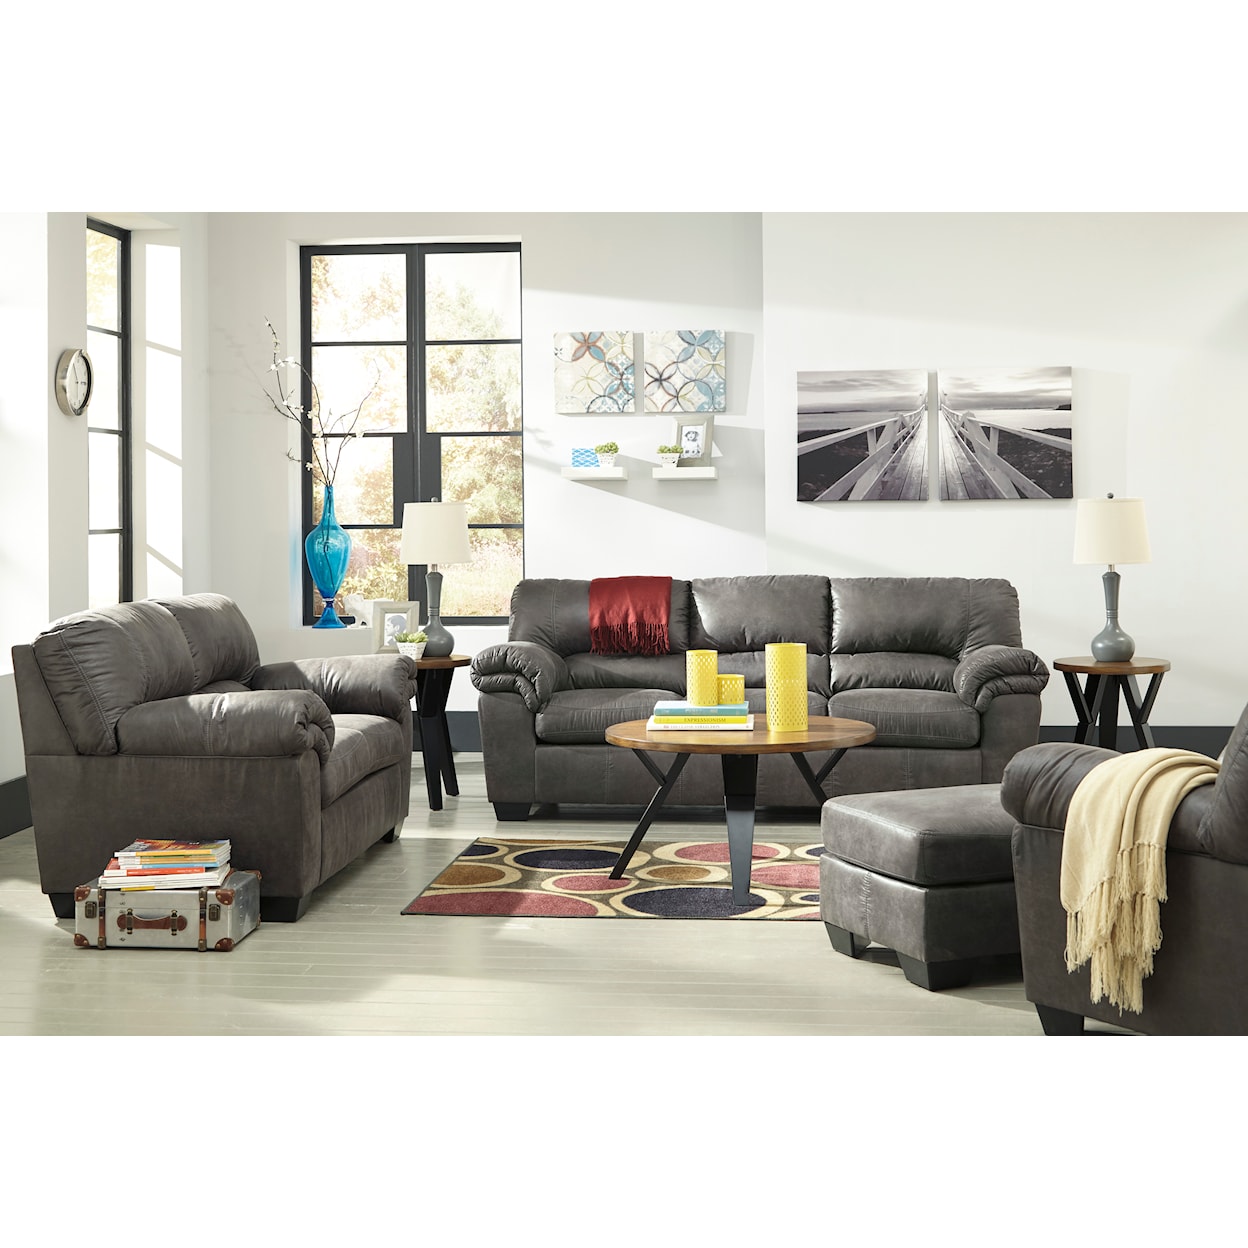 Signature Design by Ashley Furniture Bladen Sofa, Loveseat, Chair, and Ottoman